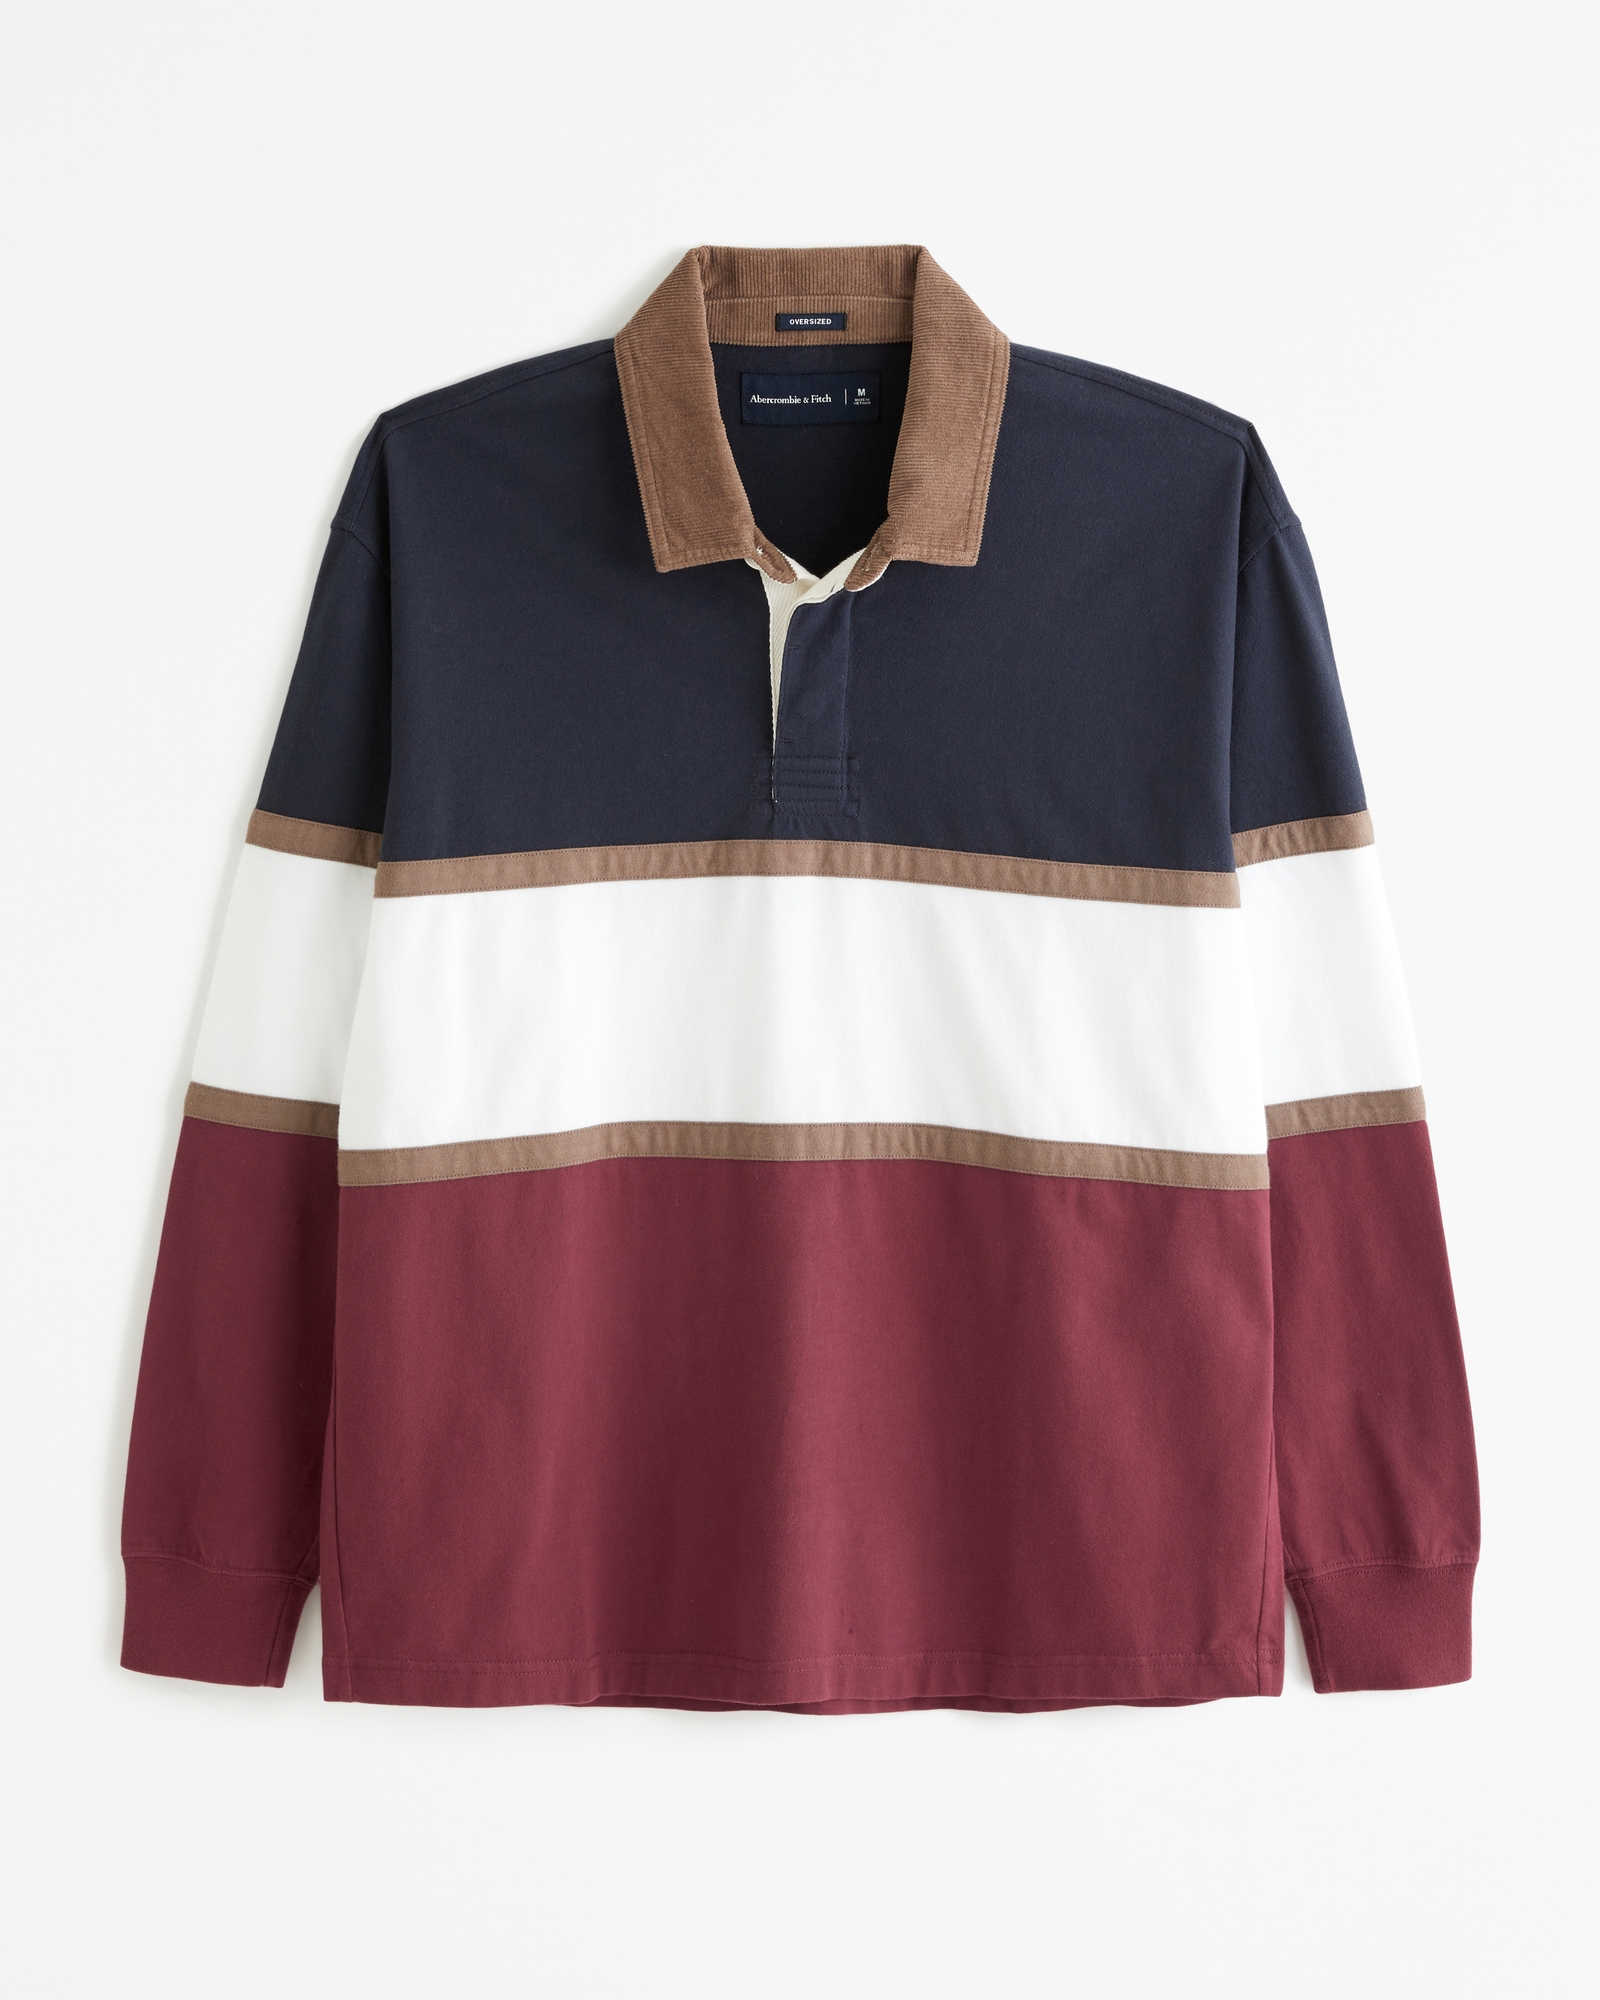 polo rugby top - OFF-51% >Free Delivery